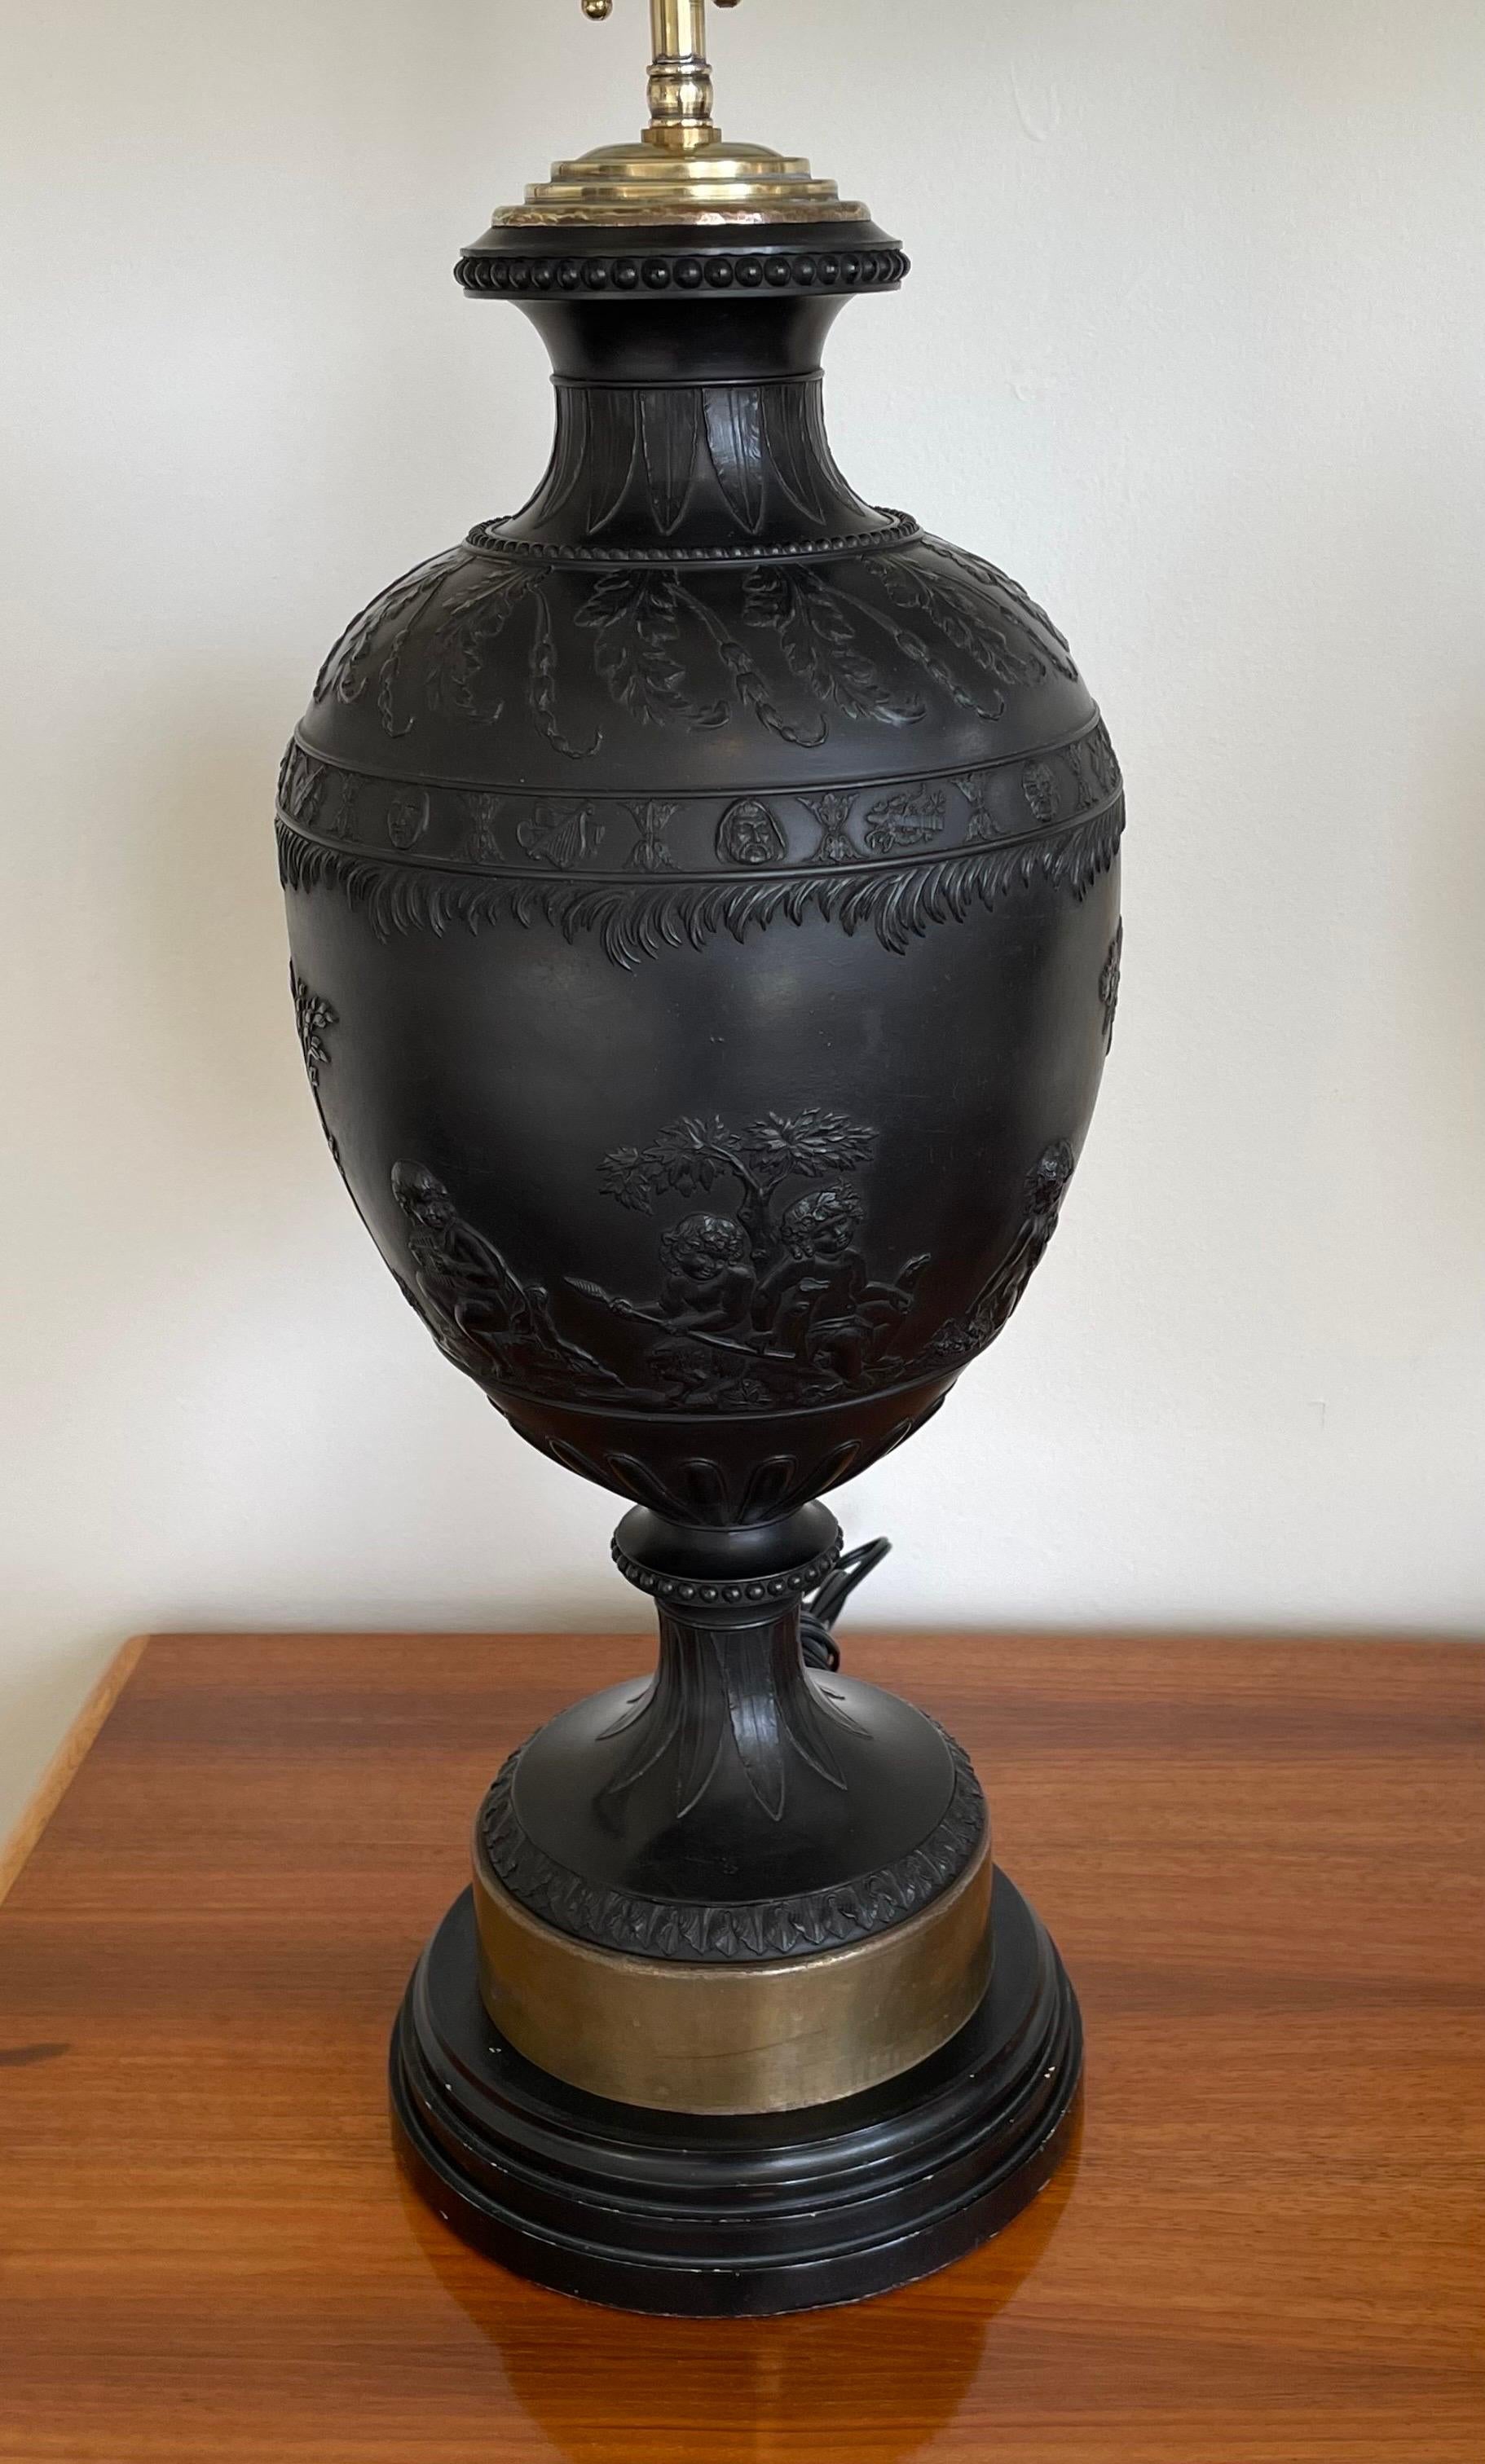 Neoclassical Monumental Pair of Black Basalt Table Lamps by Wedgwood, Late 19th Century For Sale